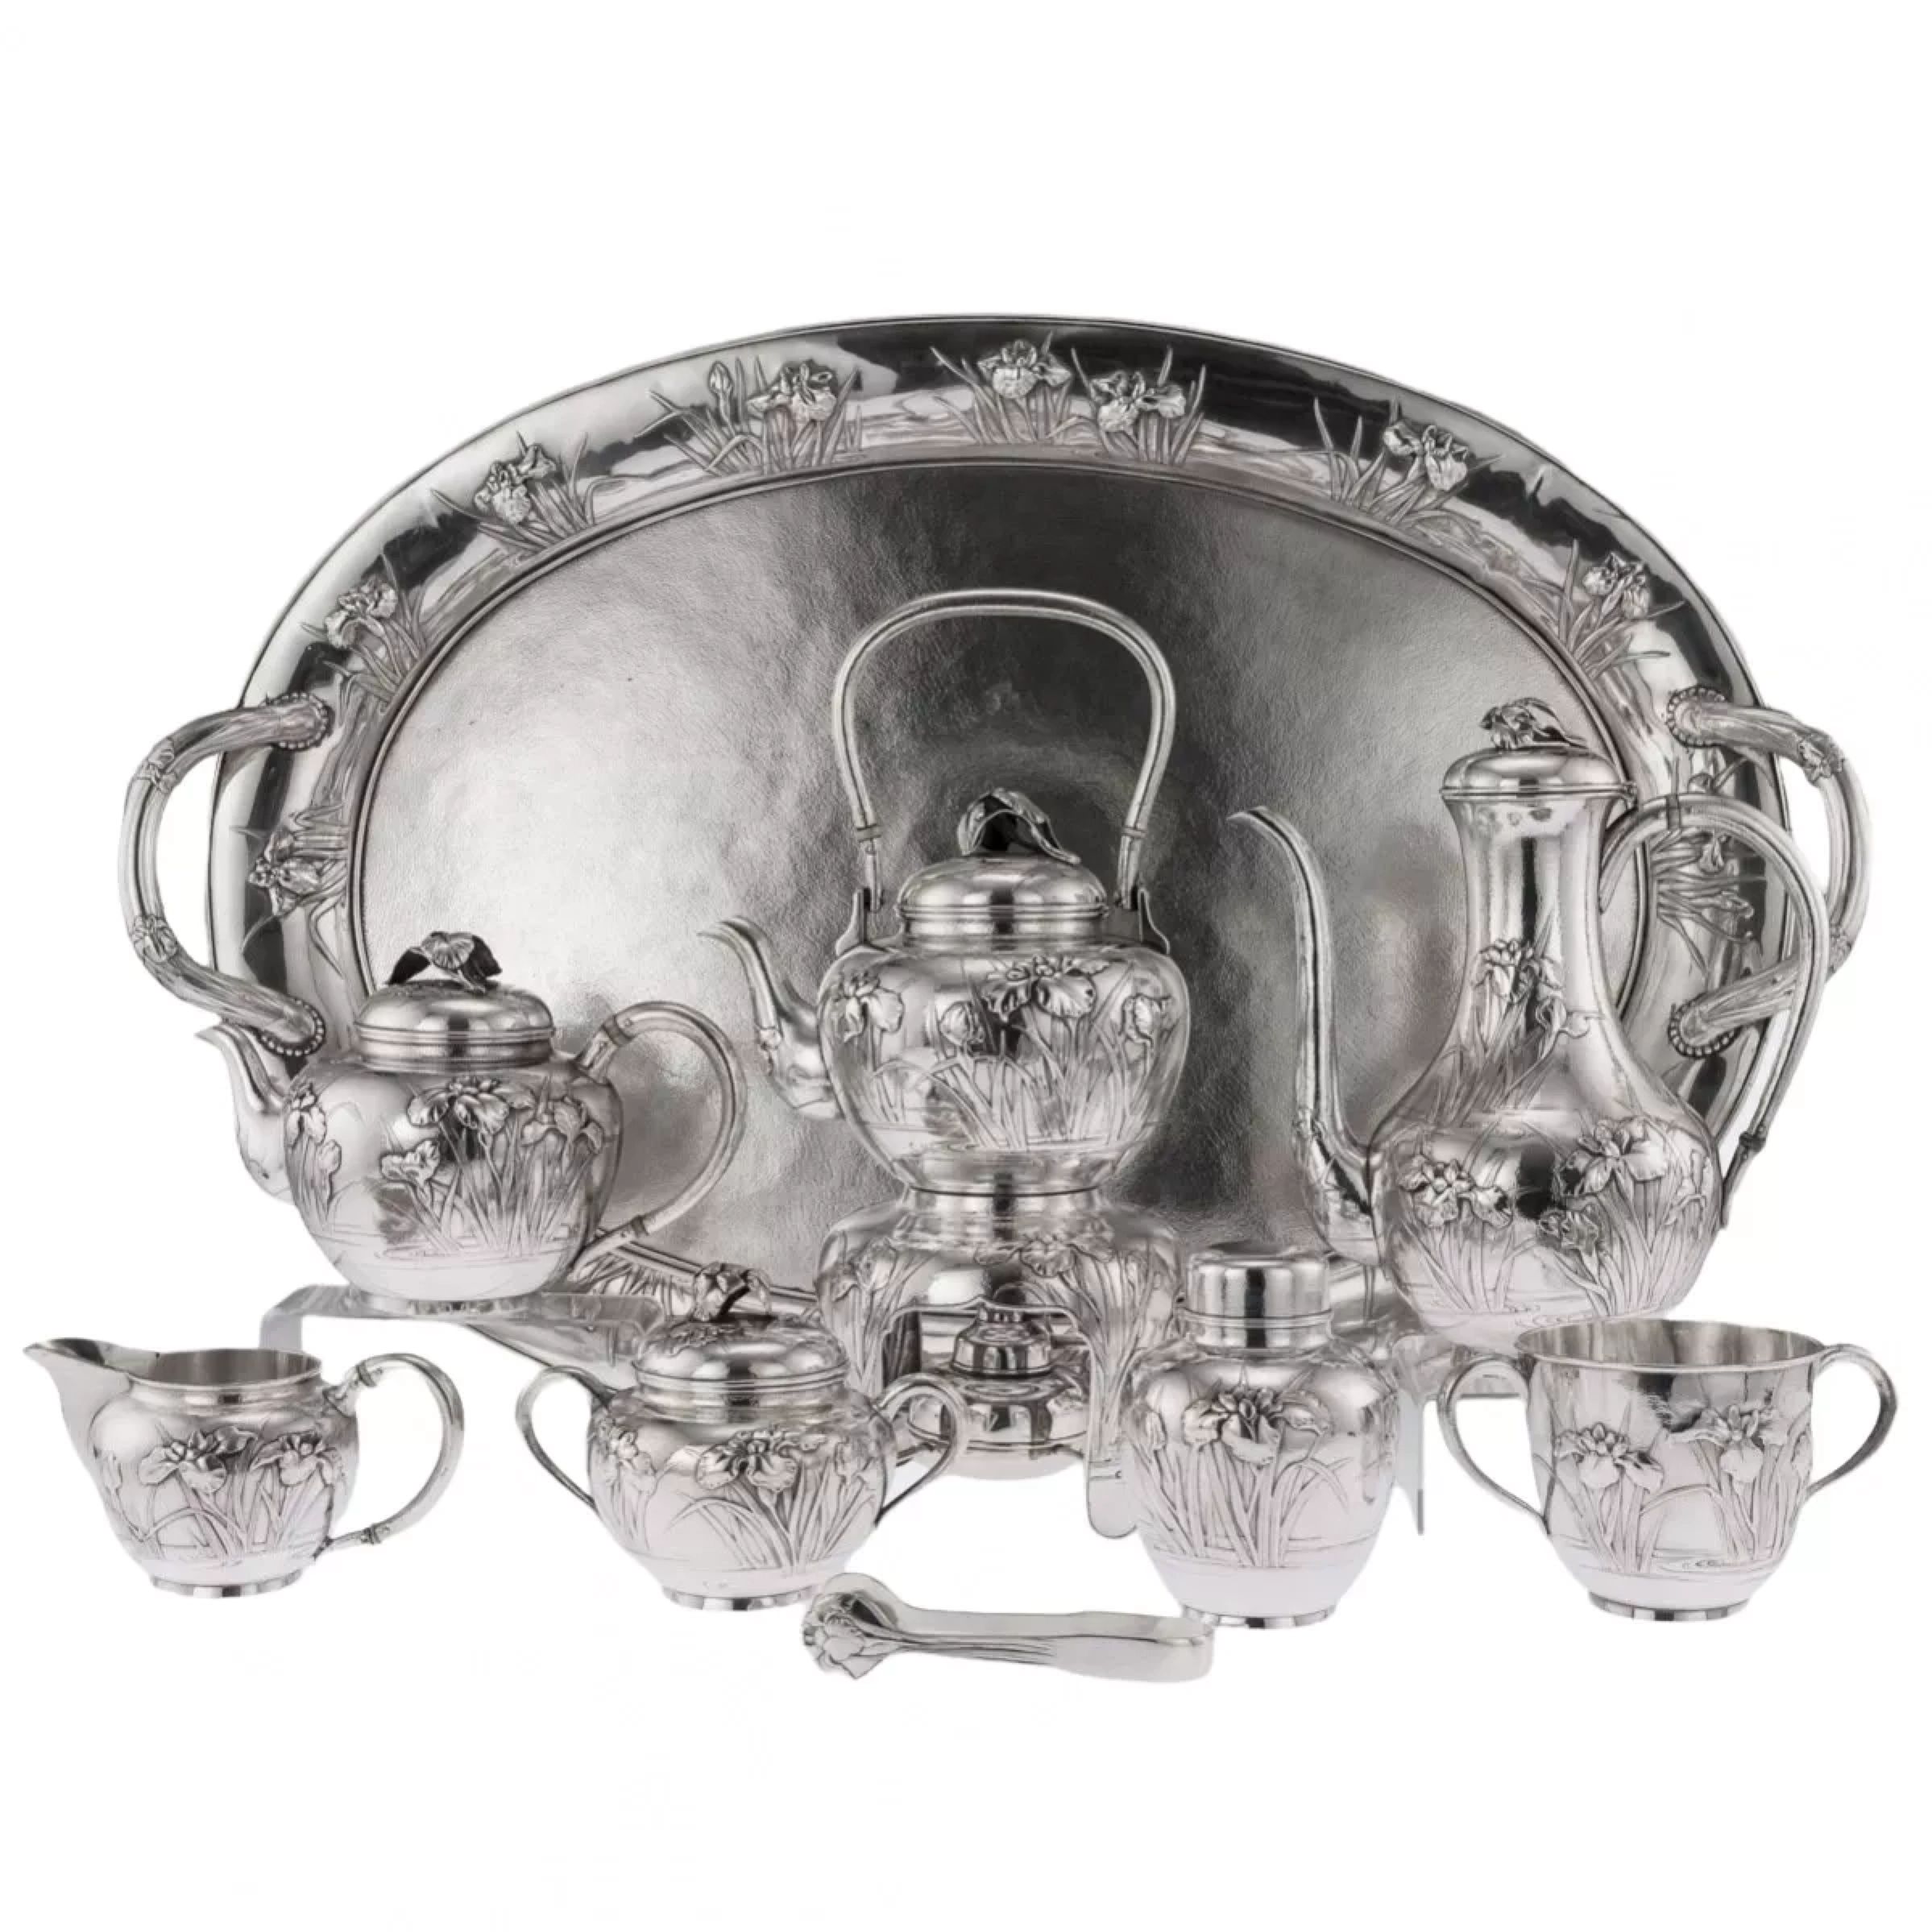 20th-century-Japanese-silver-tea-and-coffee-service-